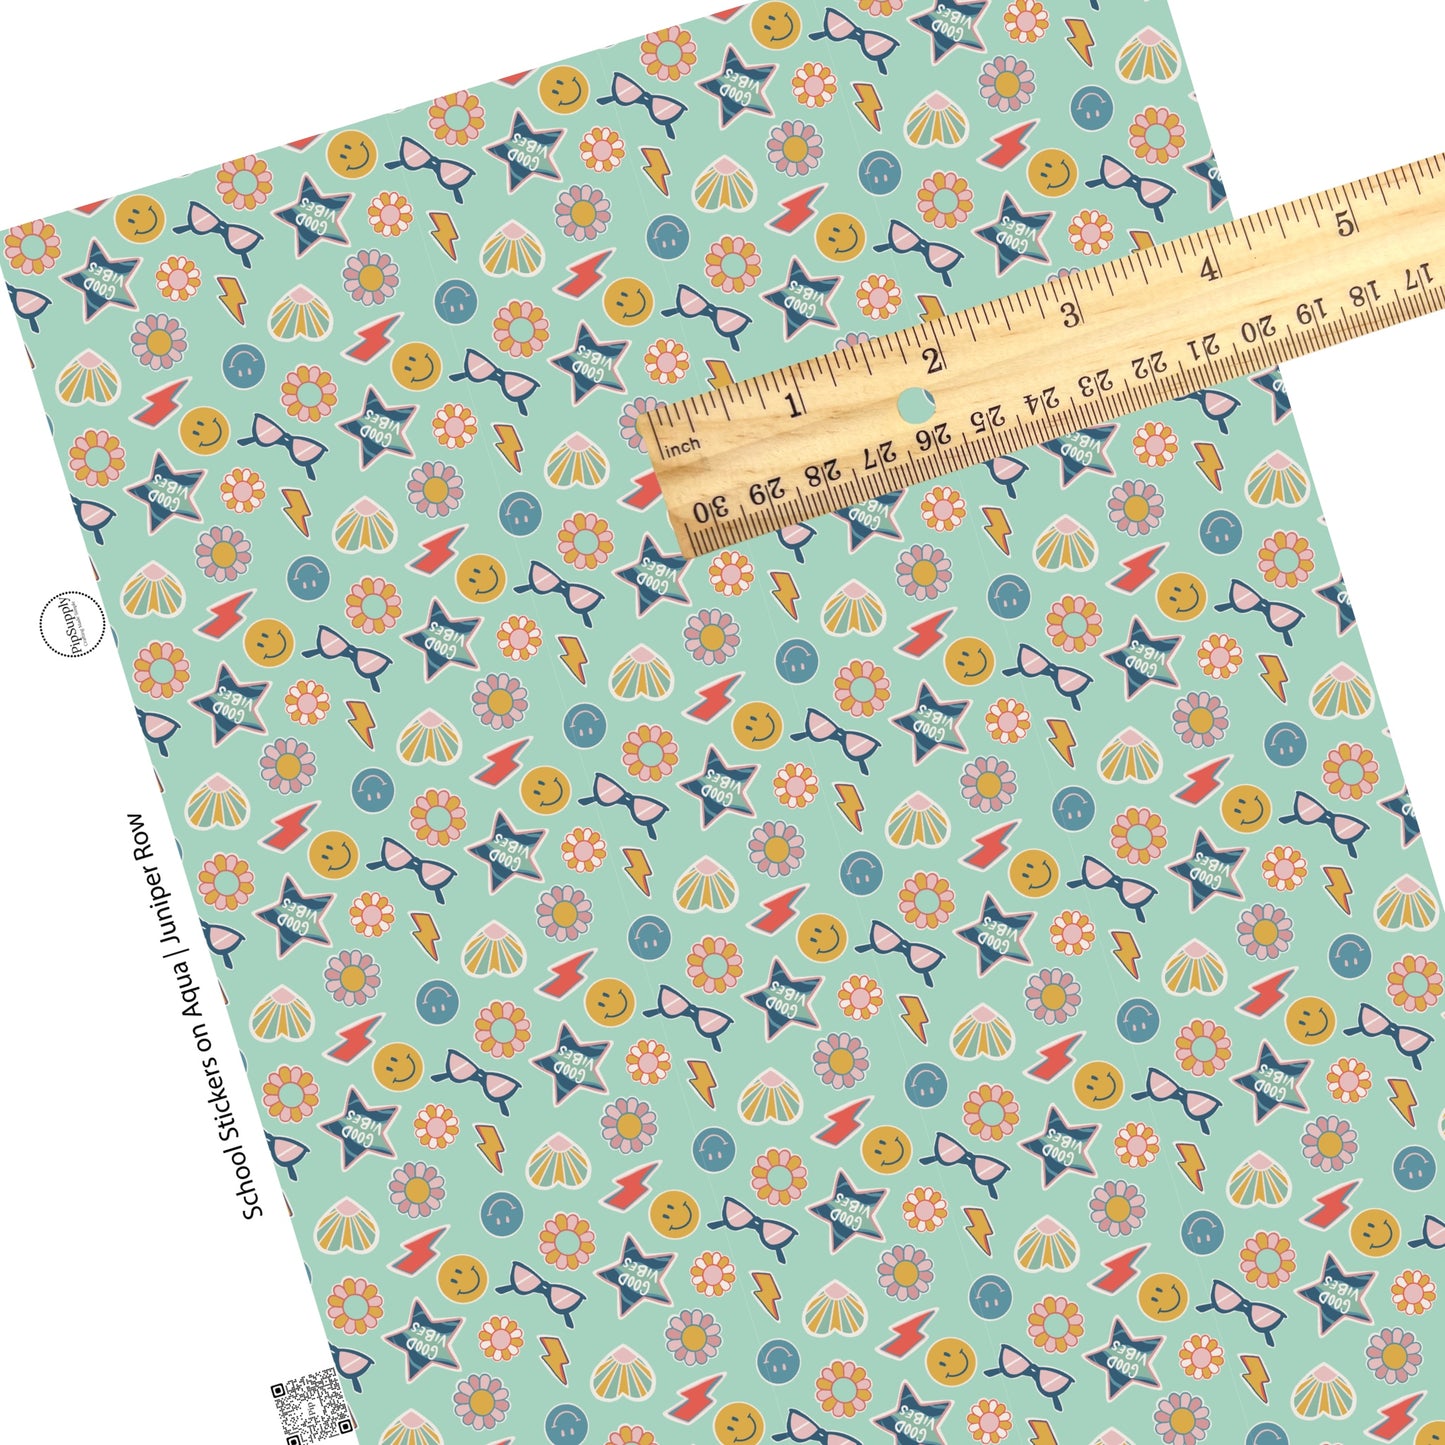 Scattered fun stickers on aqua faux leather sheets